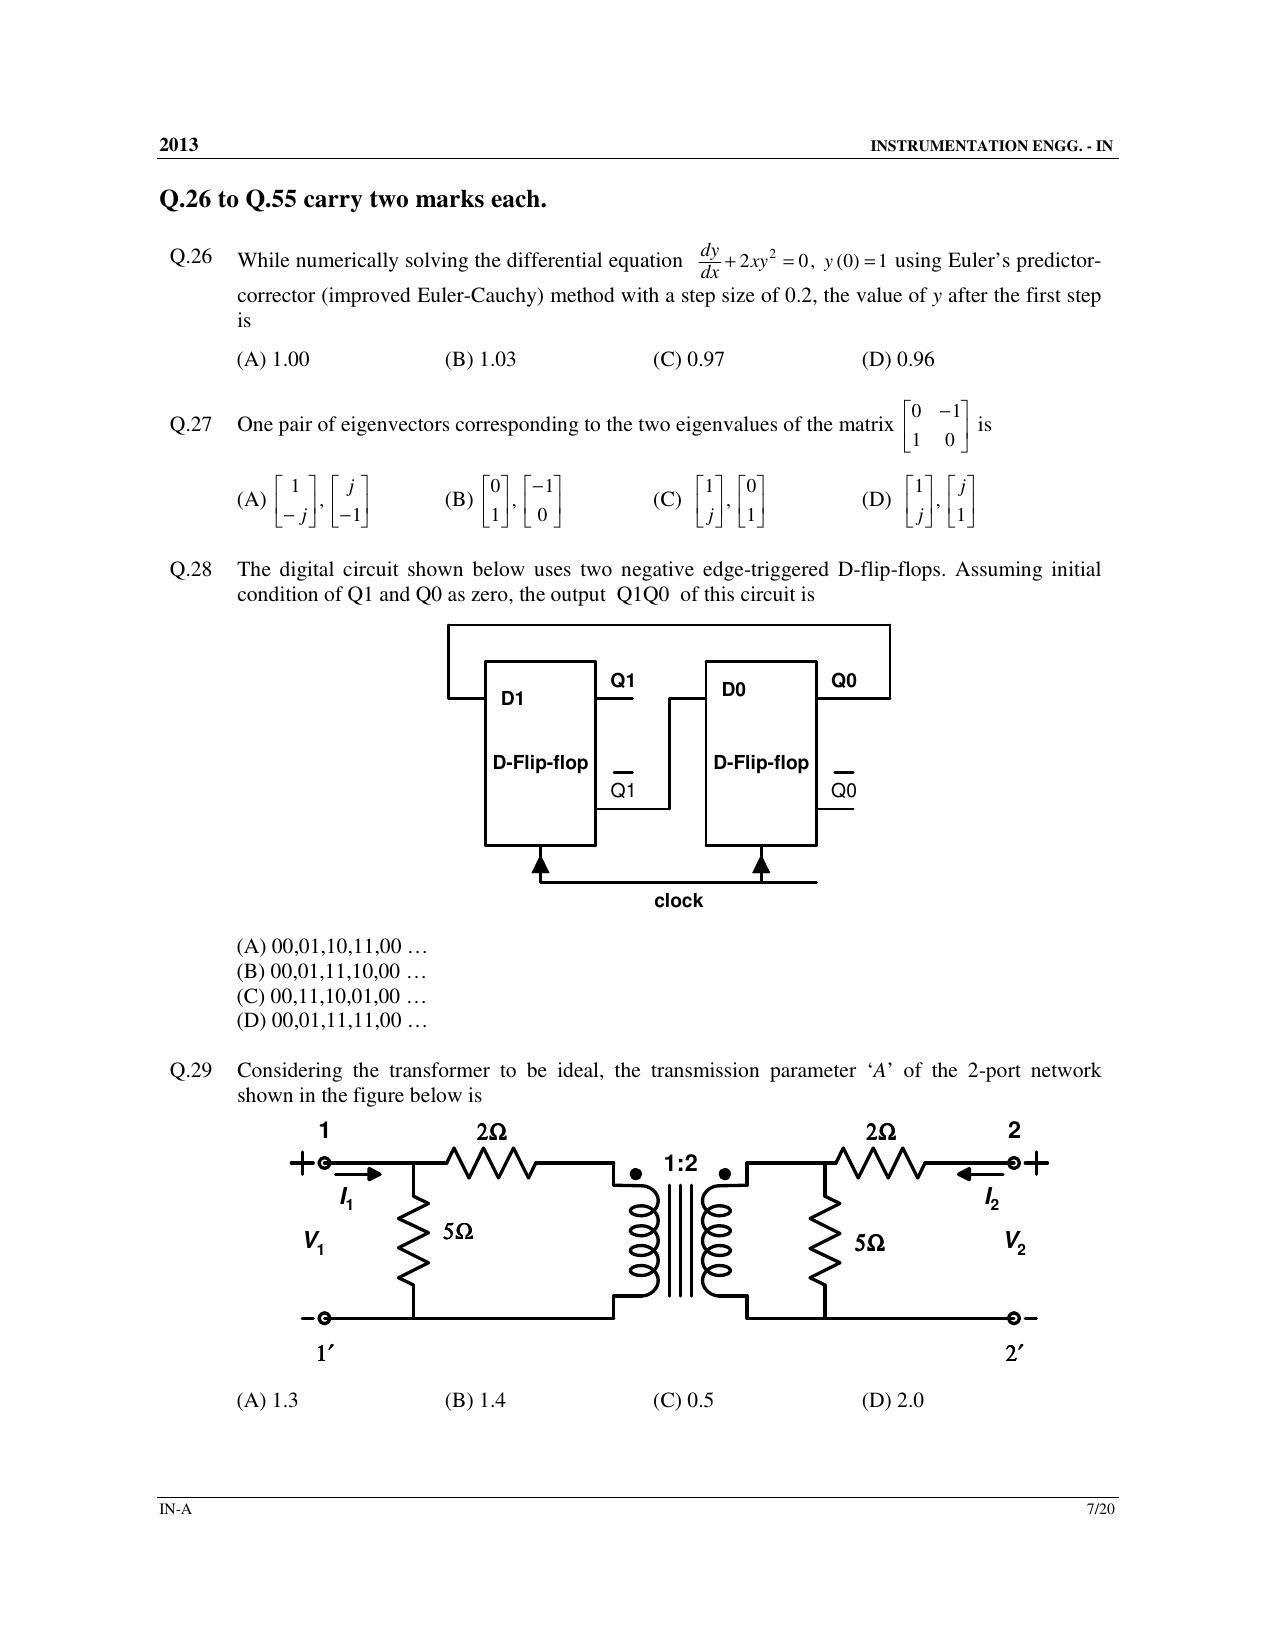 GATE 2013 Instrumentation Engineering (IN) Question Paper with Answer Key - Page 8